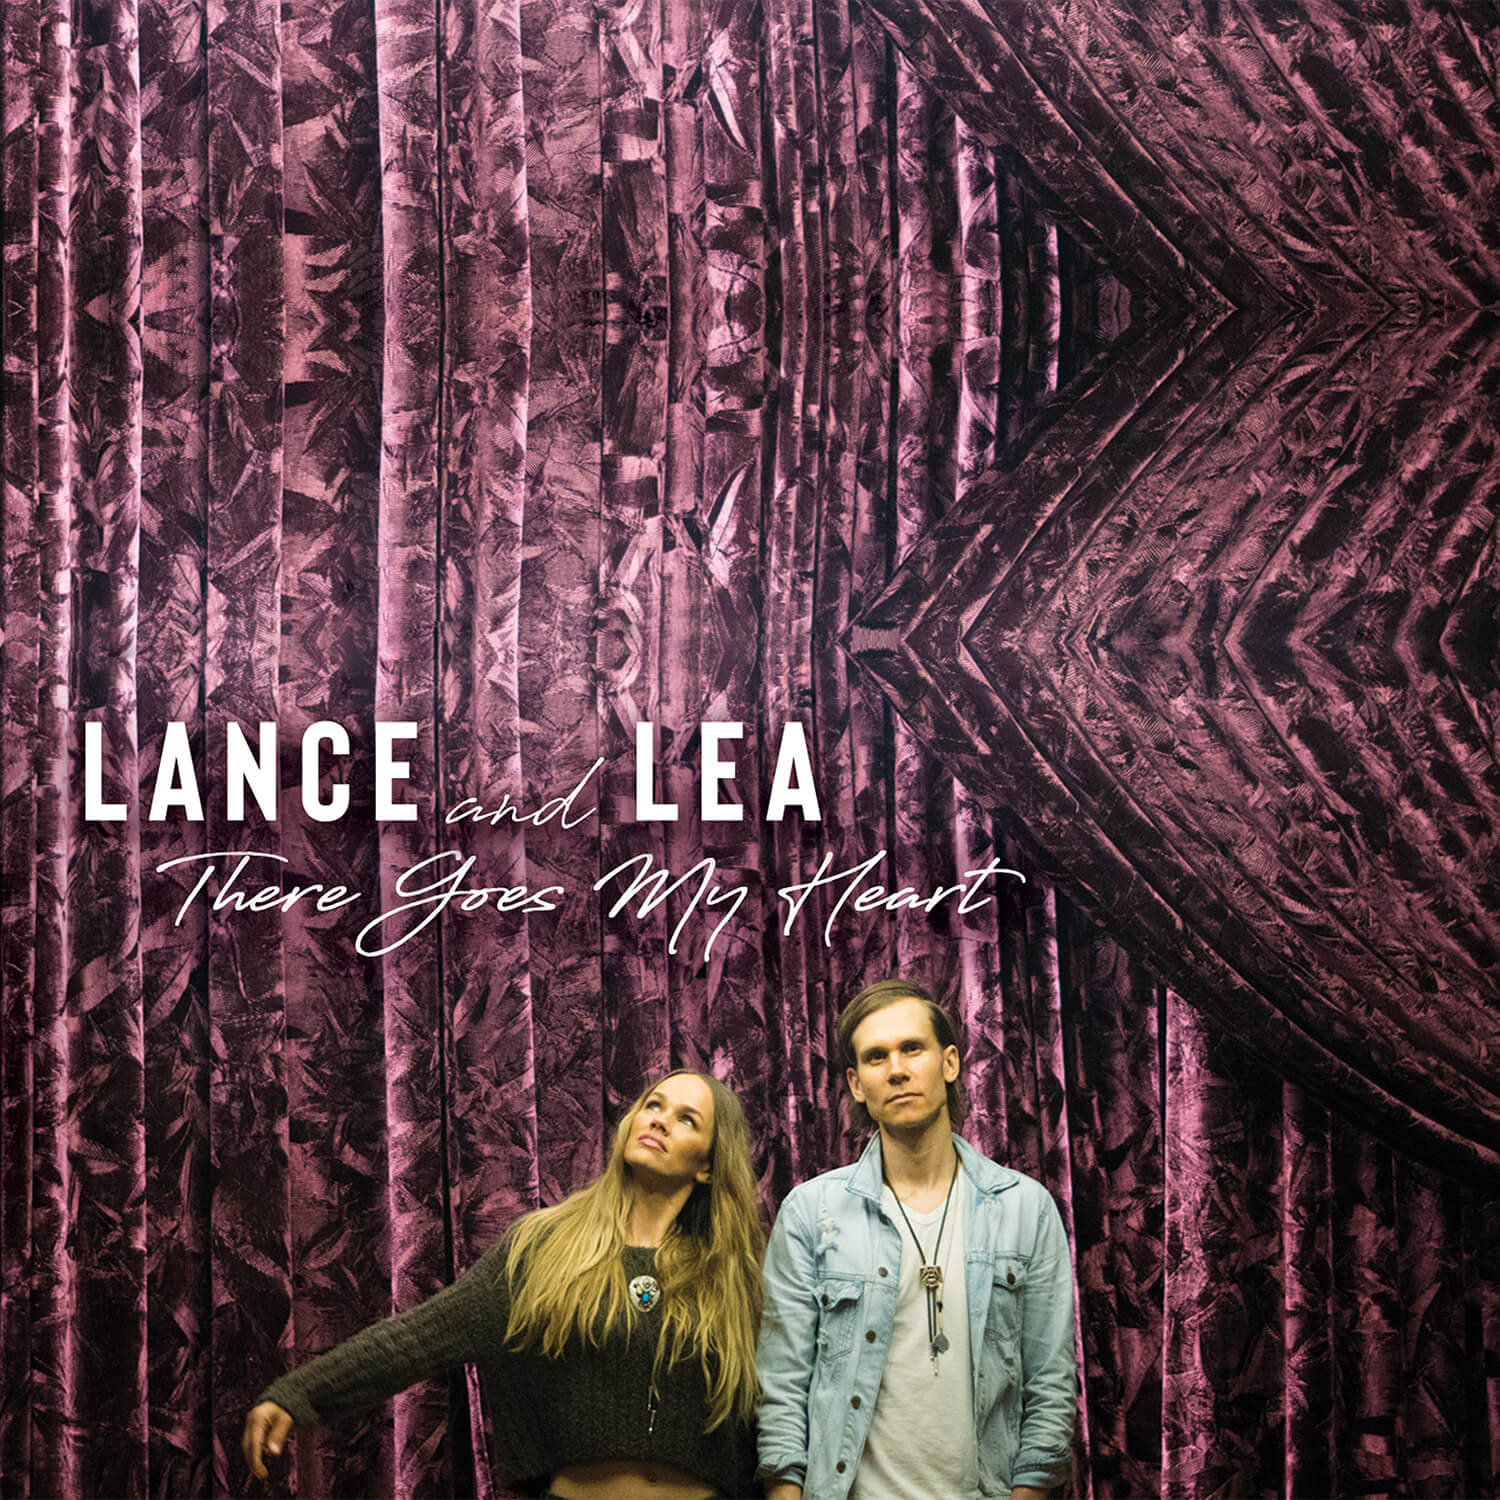 There Goes My Heart Album Download – Lance and Lea Shop